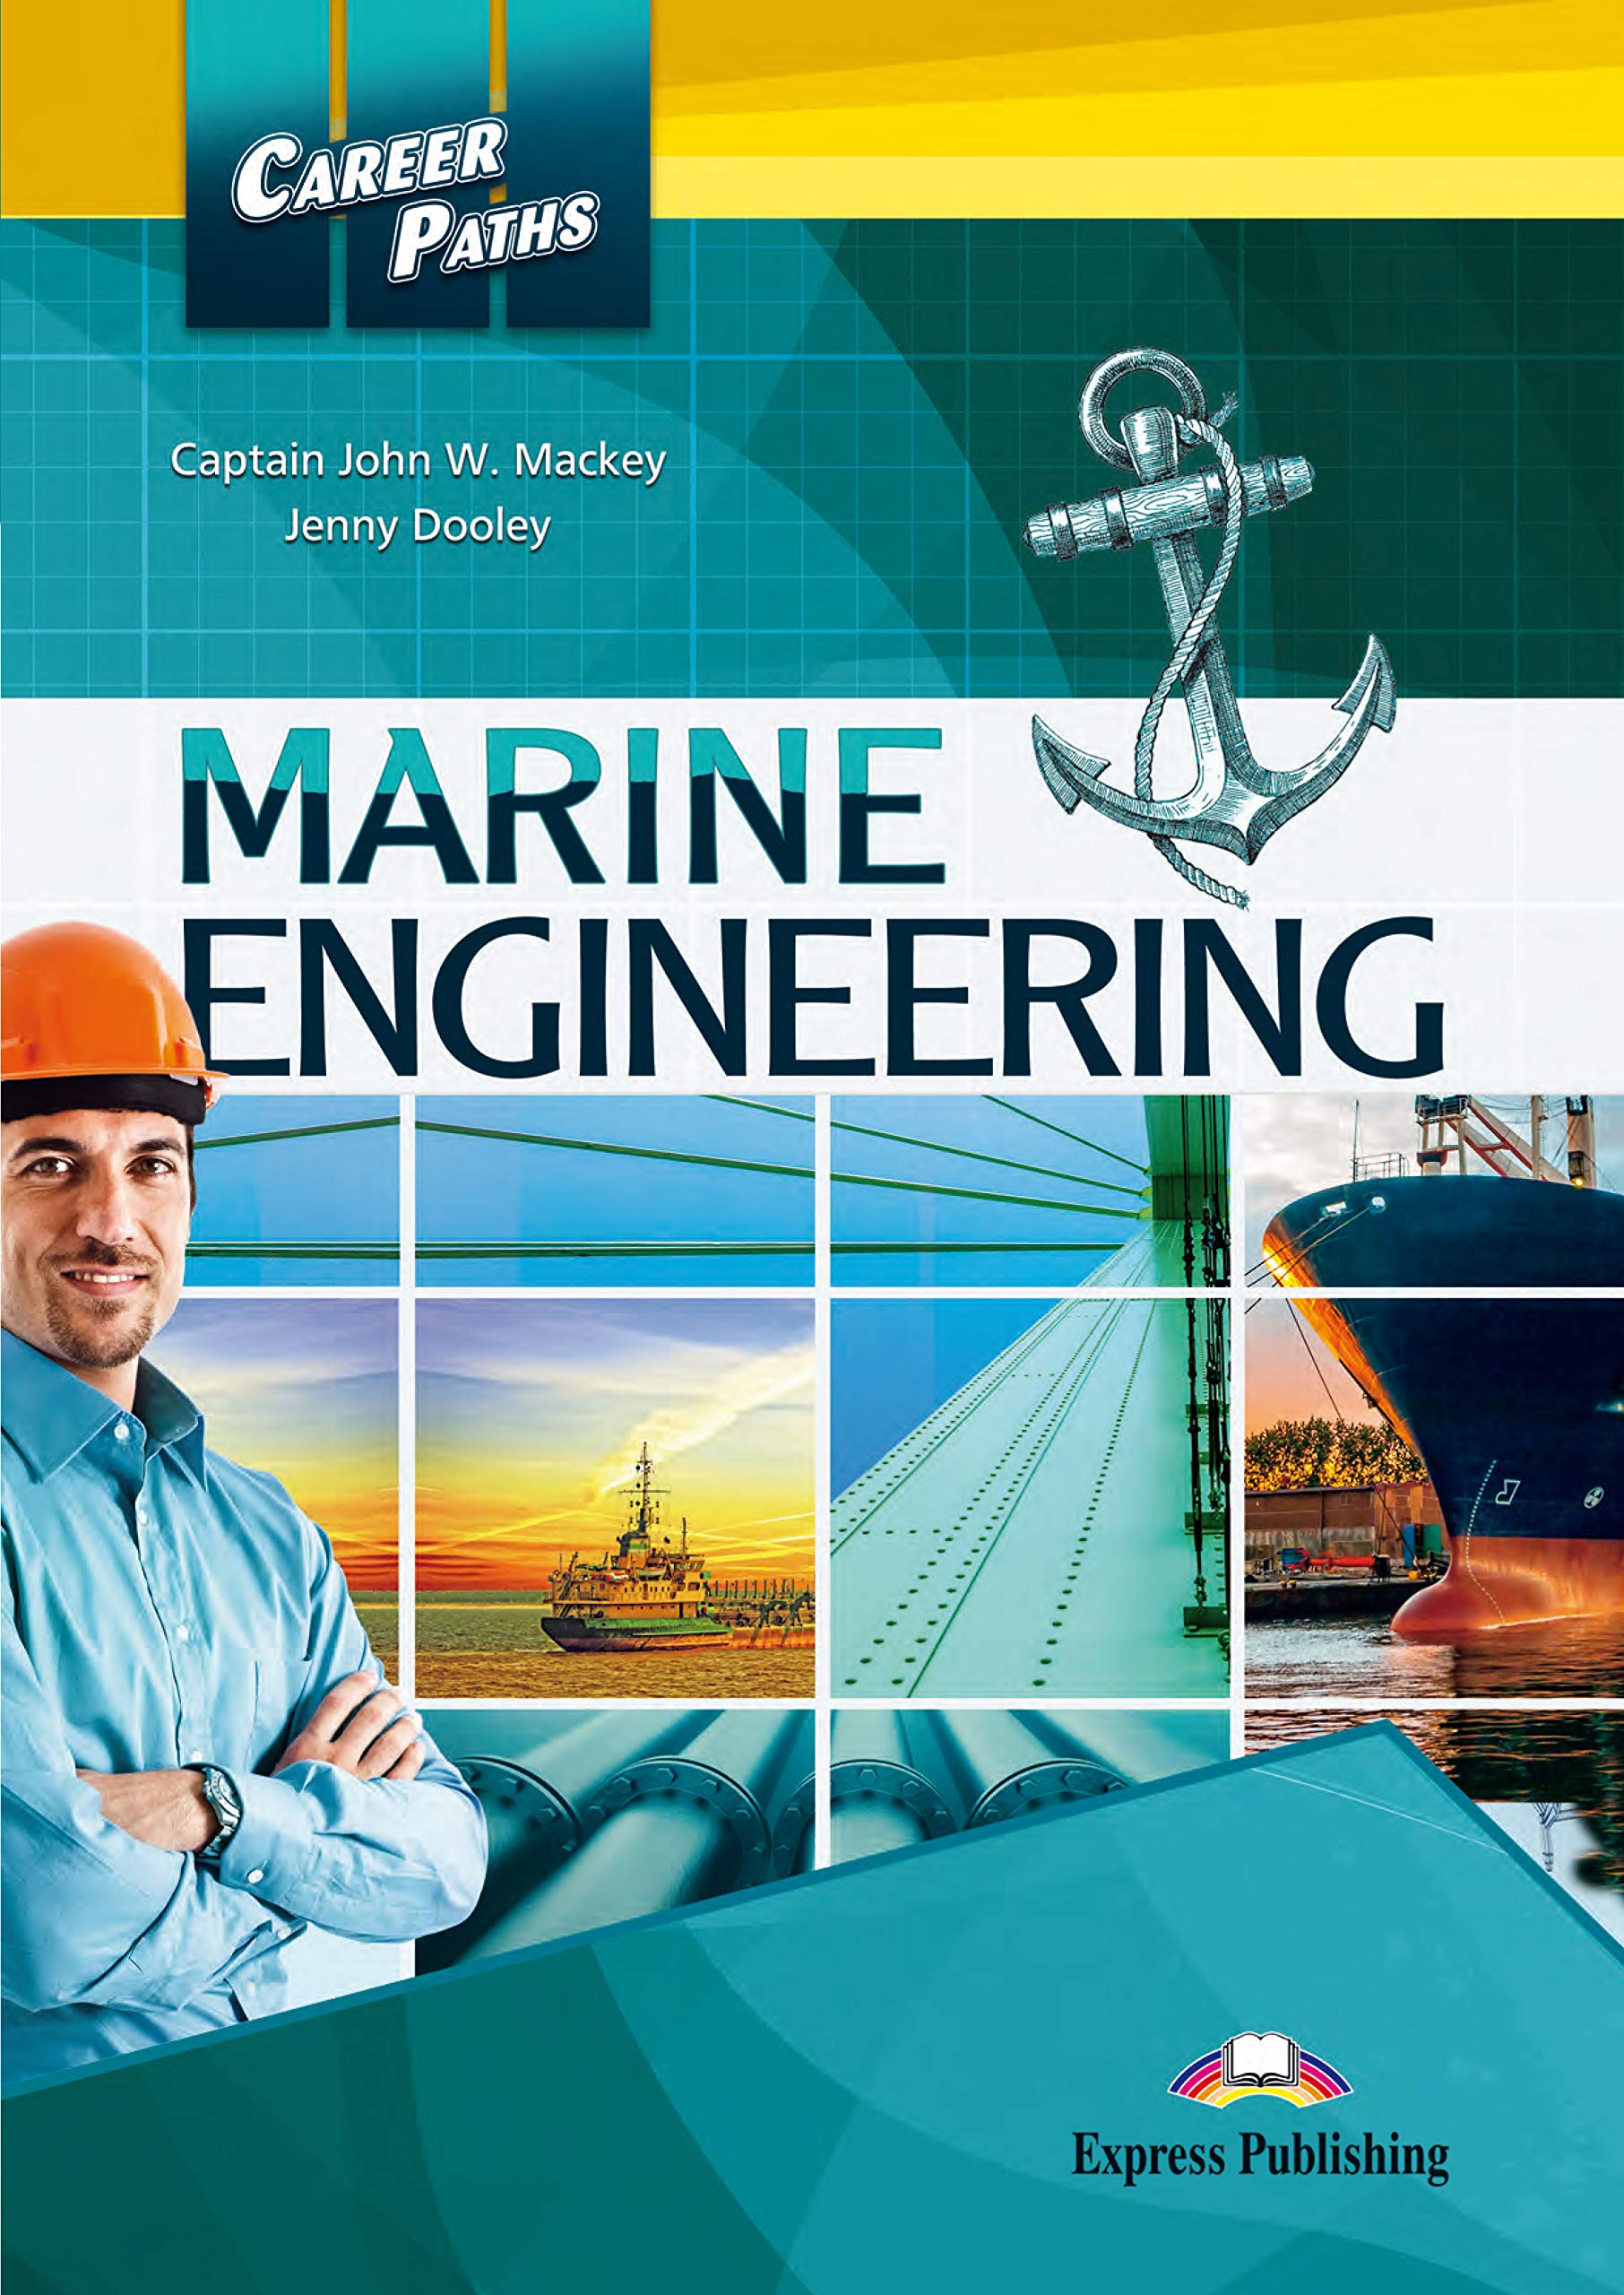 MARINE ENGINEERING (CAREER PATHS) Student's Book with digibook app. 